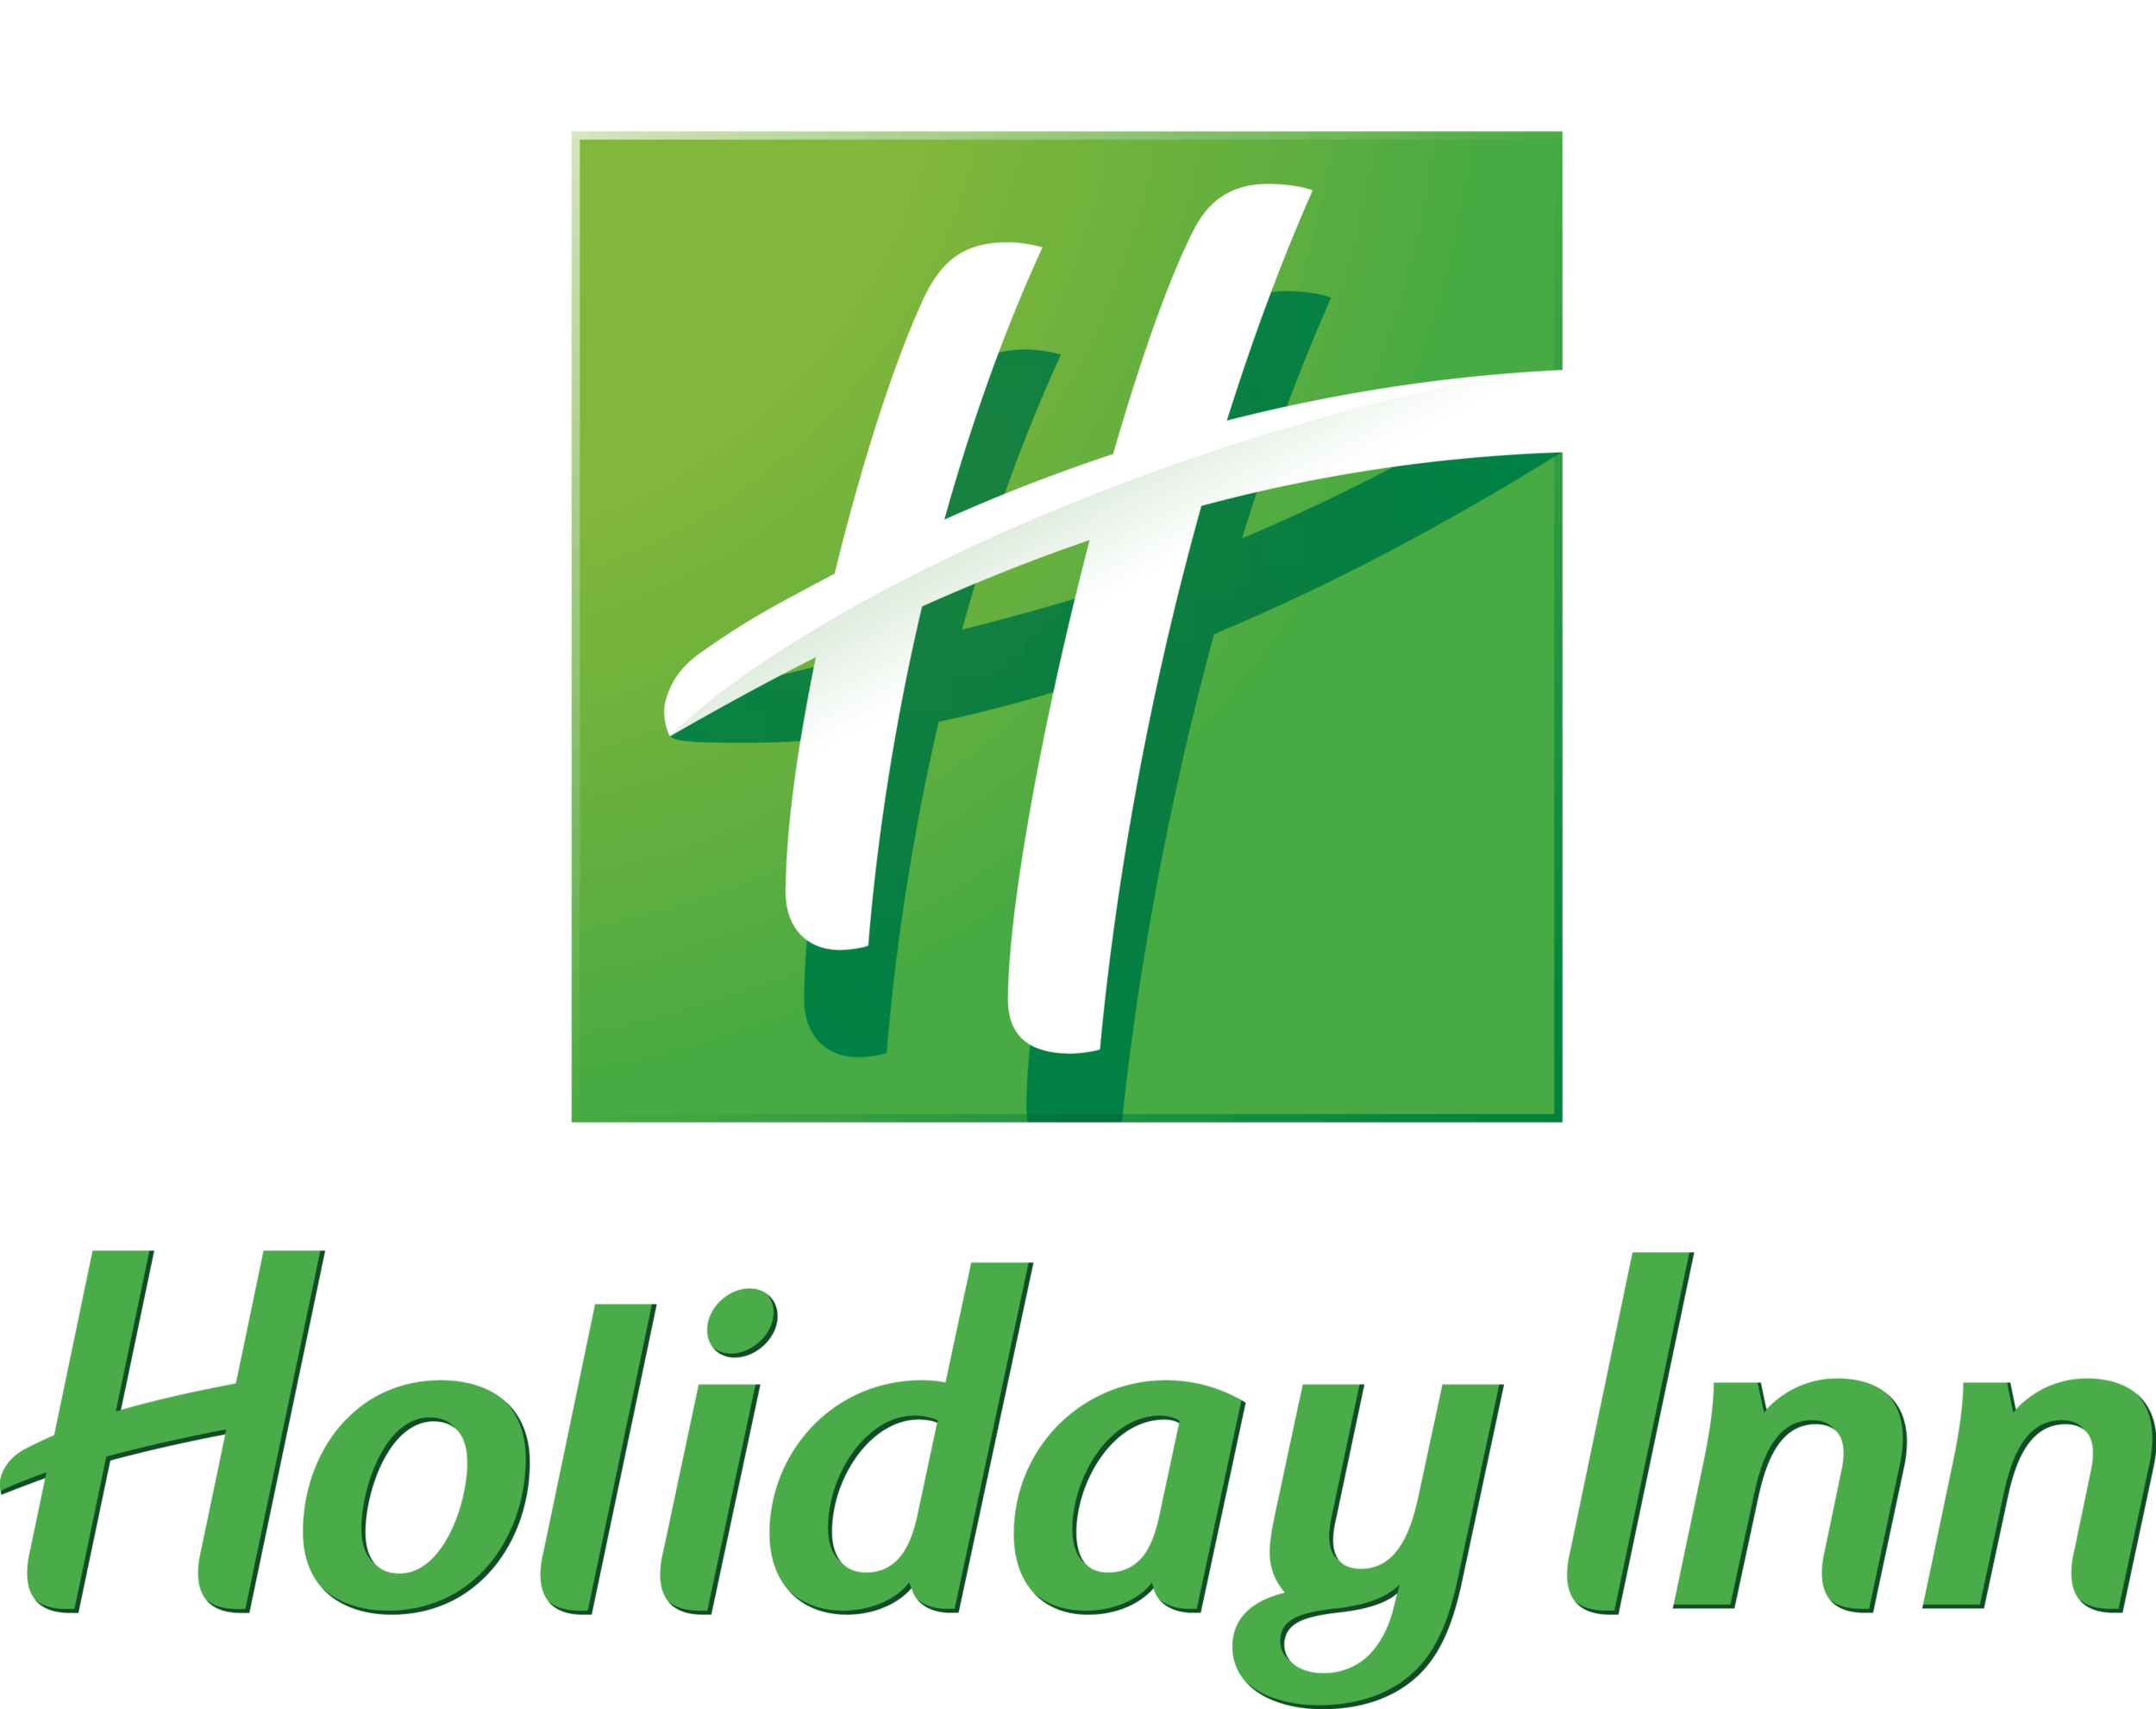 Holiday_Inn_2007.png